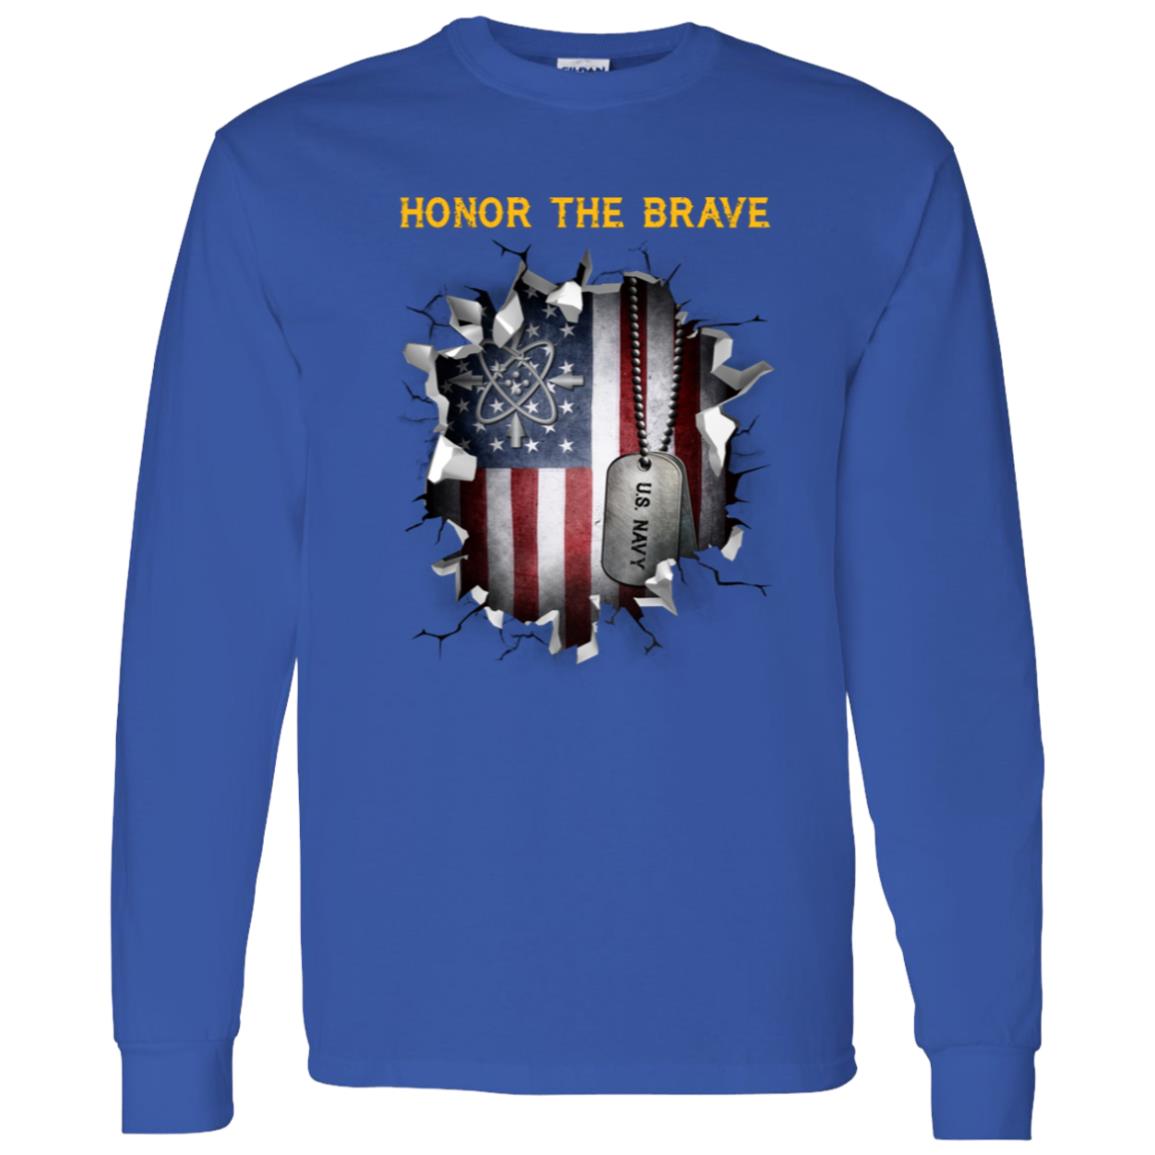 U.S Navy Data systems technician Navy DS - Honor The Brave Front Shirt